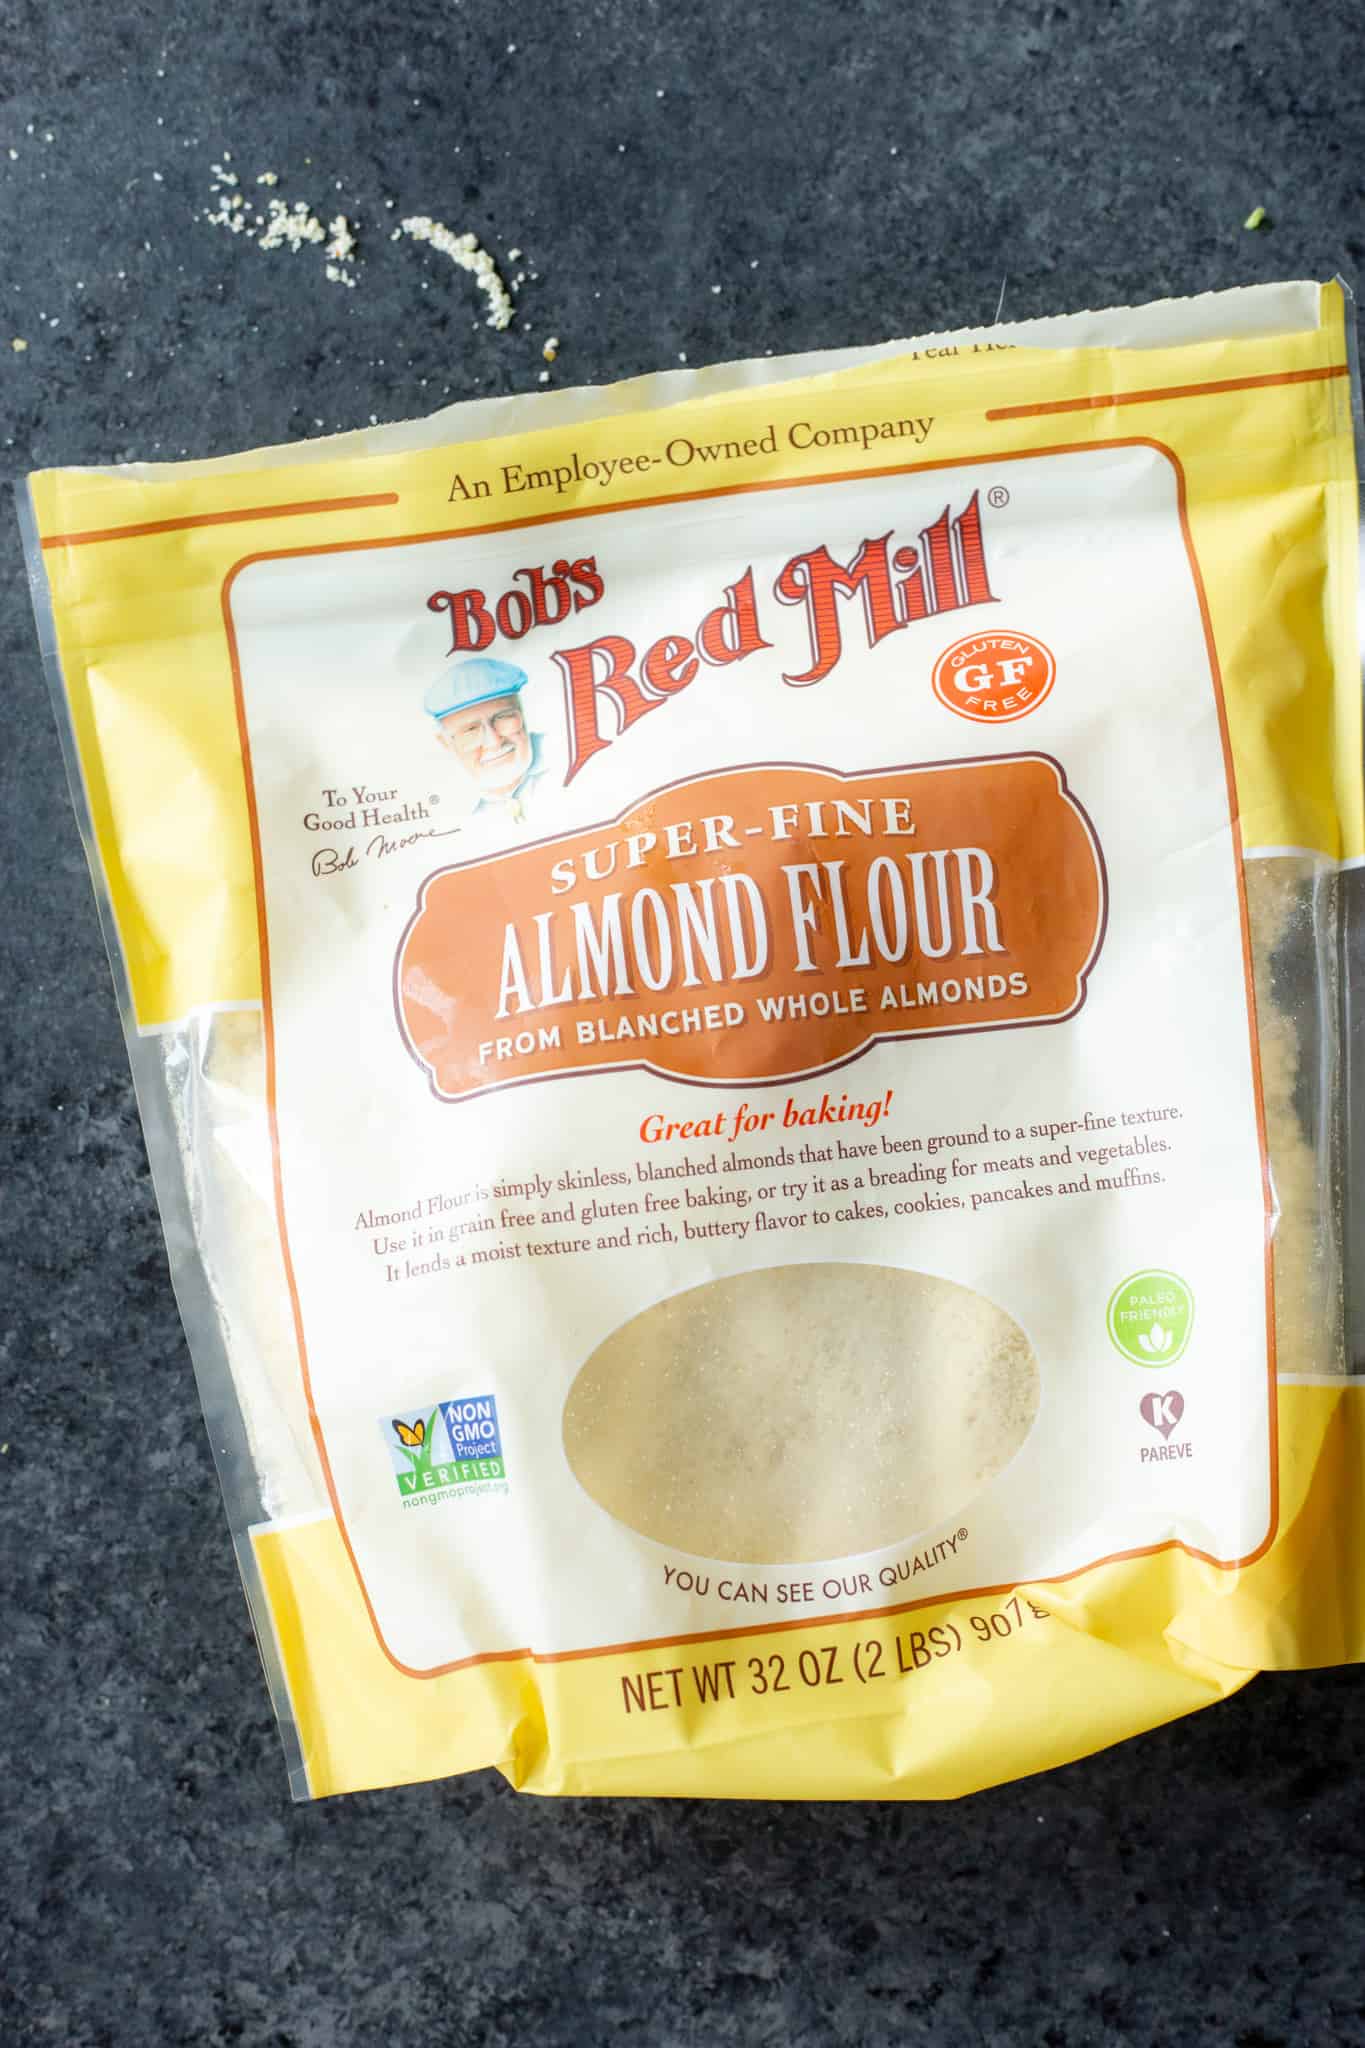 a bag of Bob's Red Mill's Almond Flour